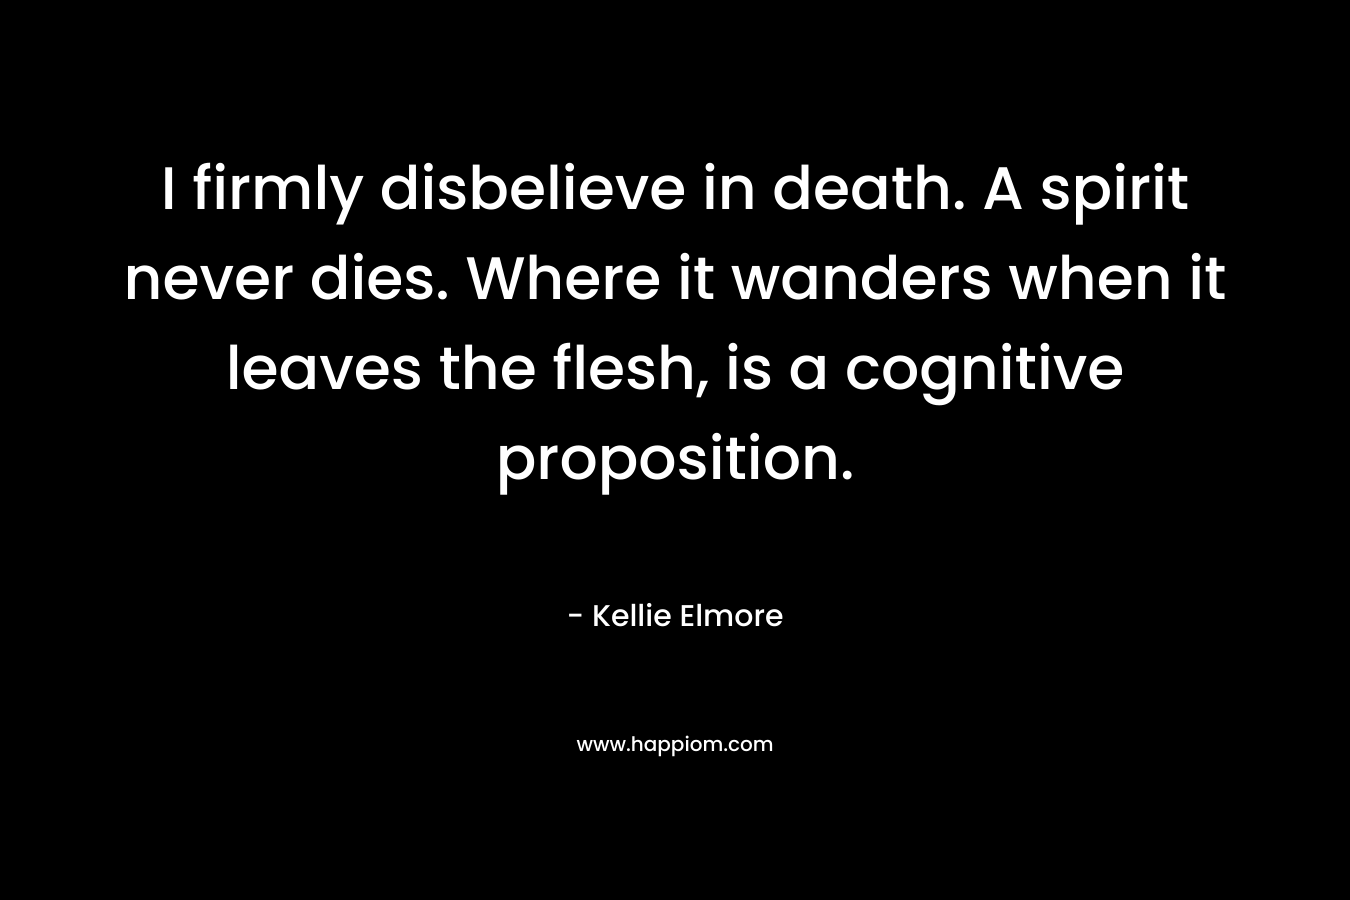 I firmly disbelieve in death. A spirit never dies. Where it wanders when it leaves the flesh, is a cognitive proposition. – Kellie Elmore